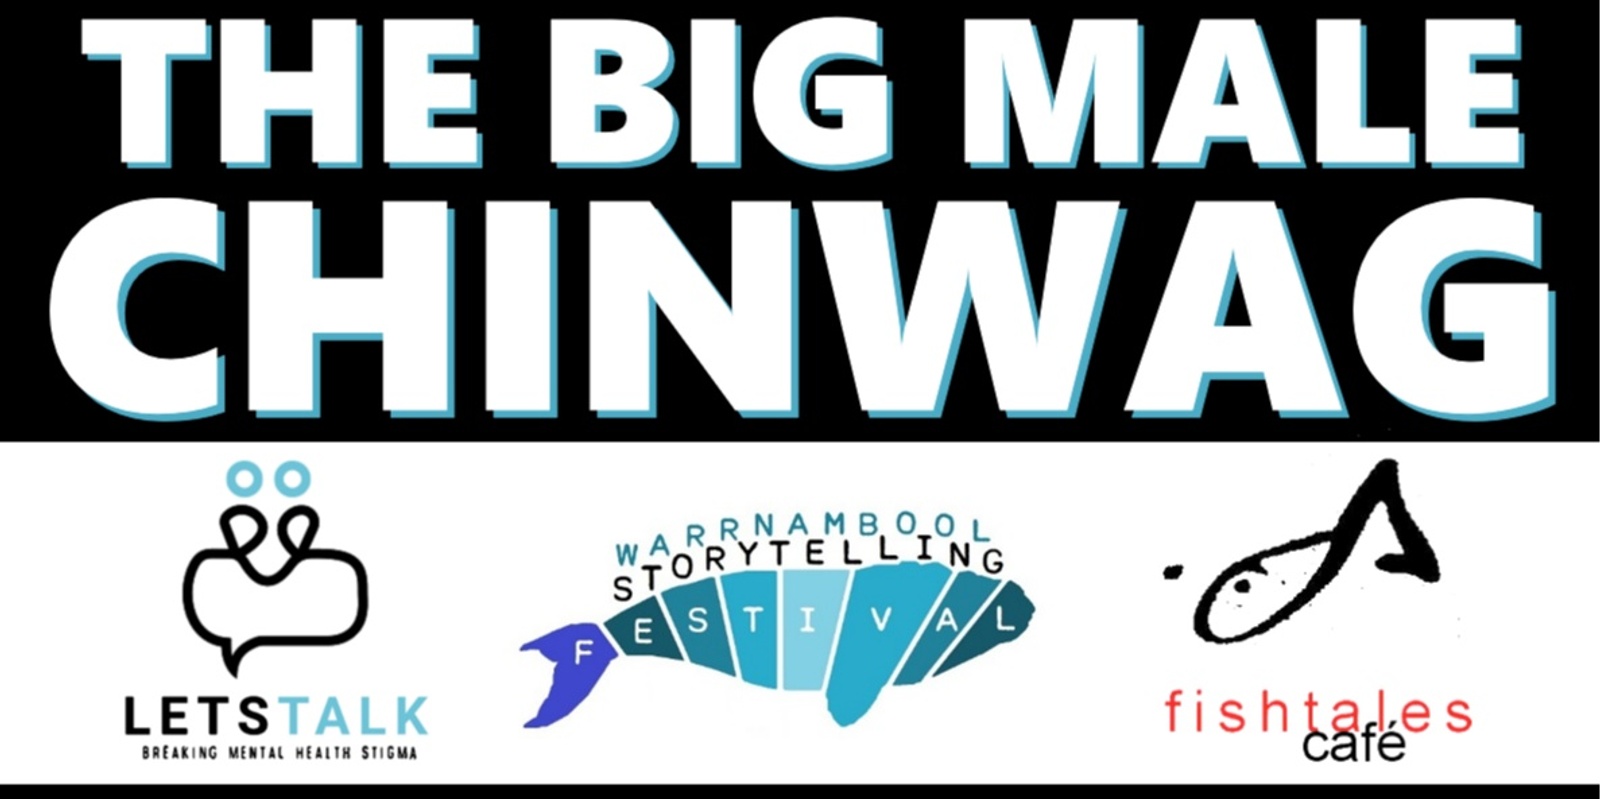 Banner image for The Big Male Chinwag